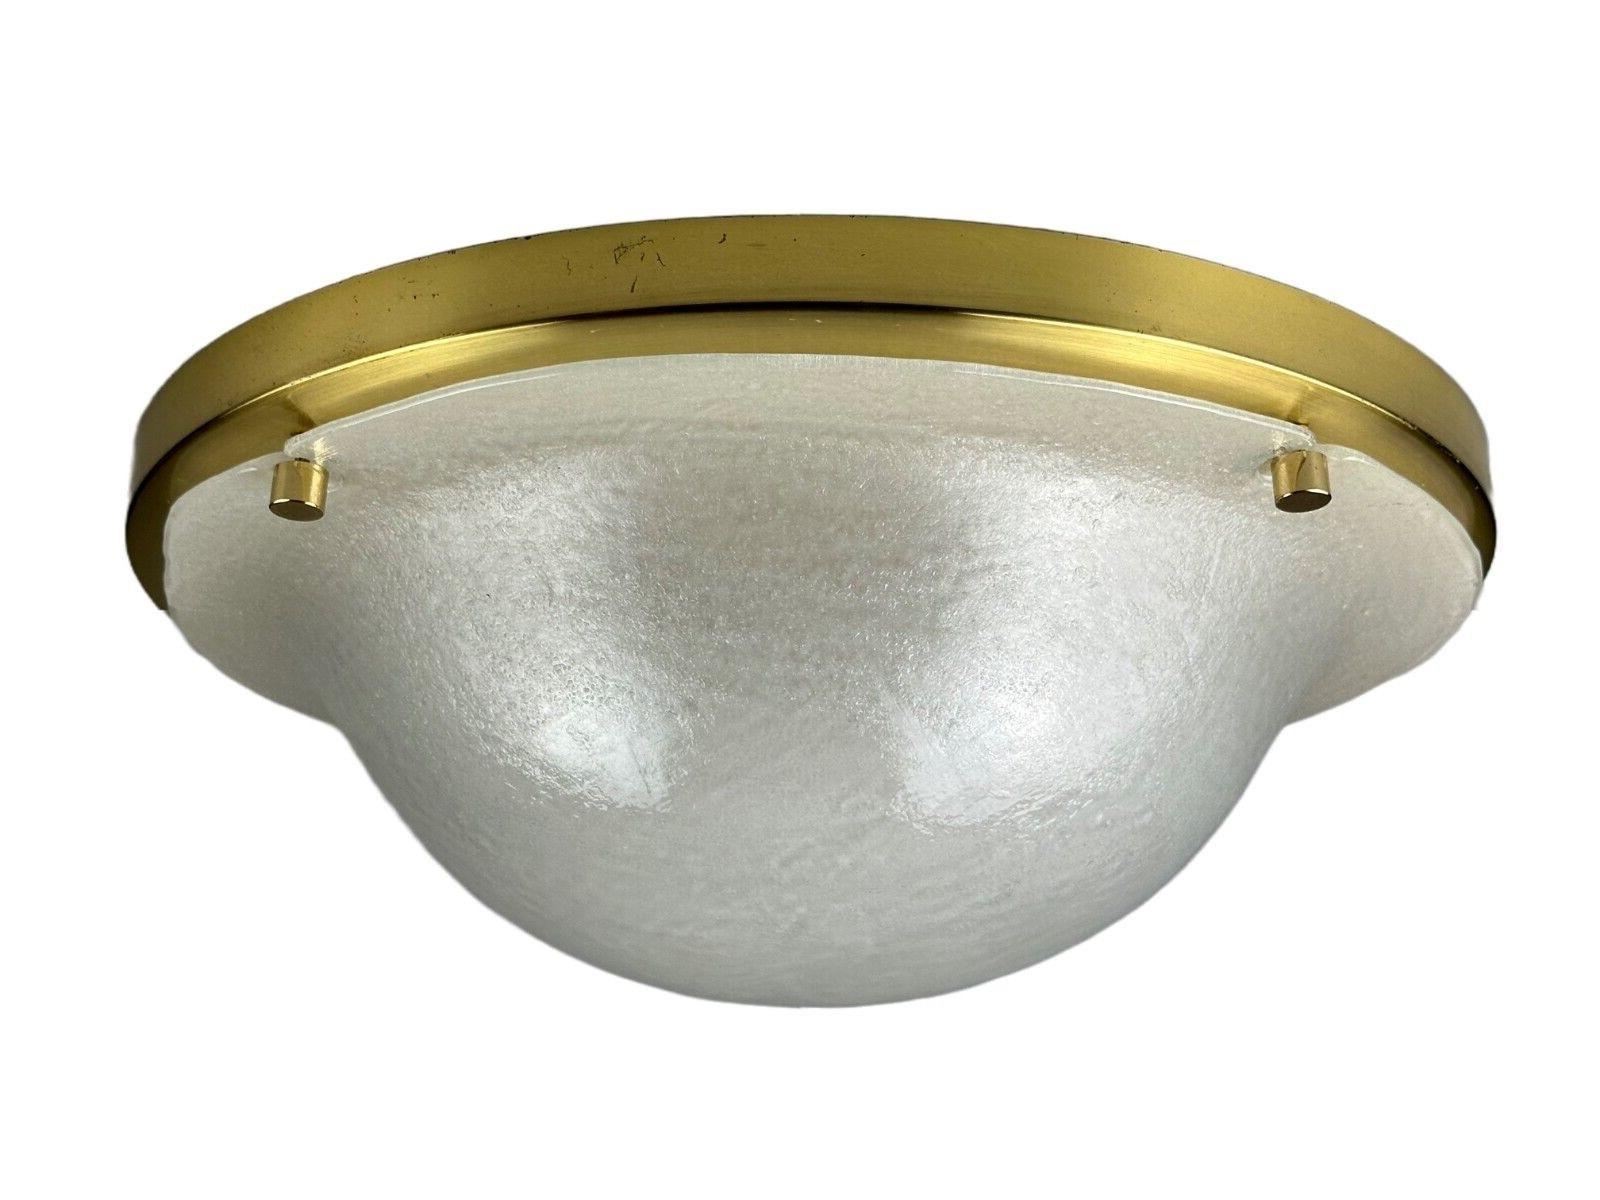 60s 70s Plafoniere ceiling lamp Limburg Germany glass brass Space Age

Object: ceiling lamp

Manufacturer: Limburg

Condition: good

Age: around 1960-1970

Dimensions:

Diameter = 42cm
Height = 15cm

Other notes:

The pictures serve as part of the